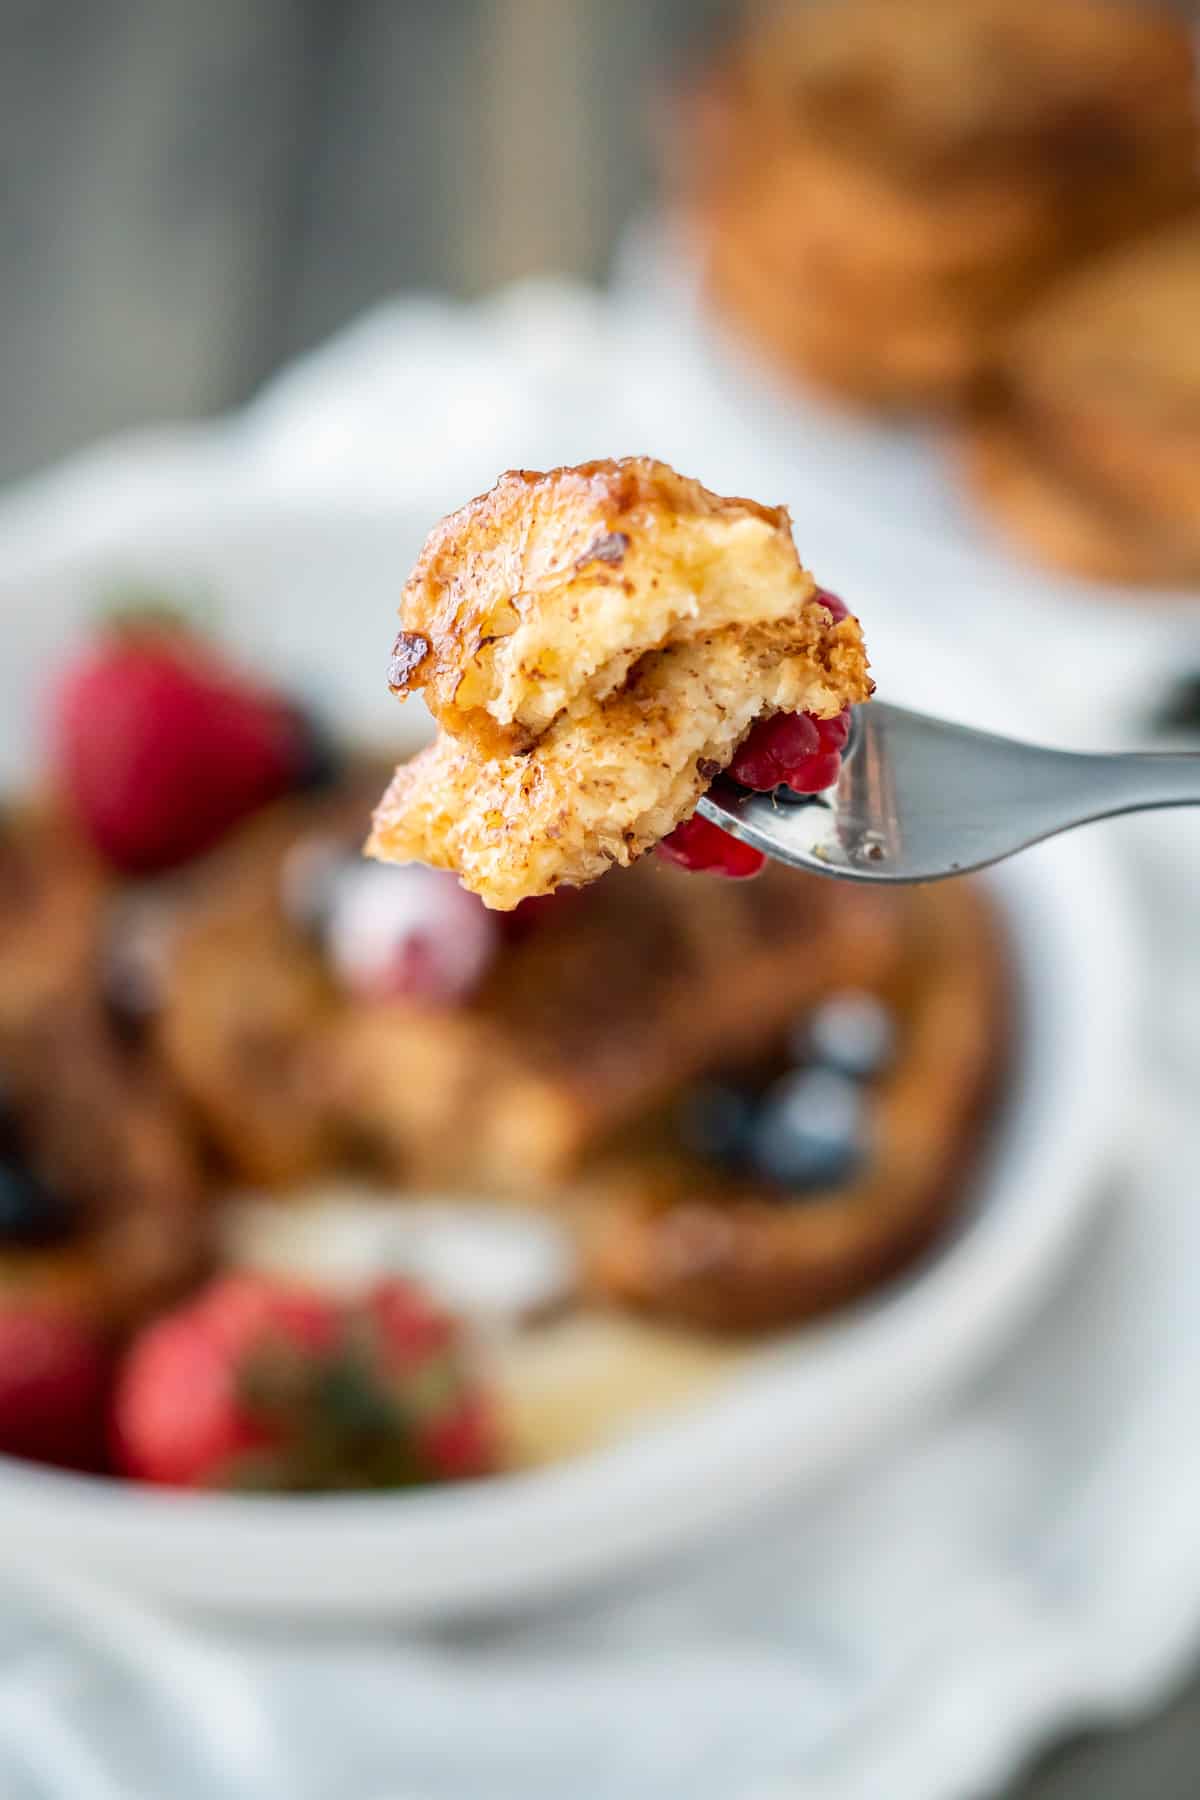 A bit of two slices of french toast with a fresh raspberry to show the fluffy souffle-like texture.